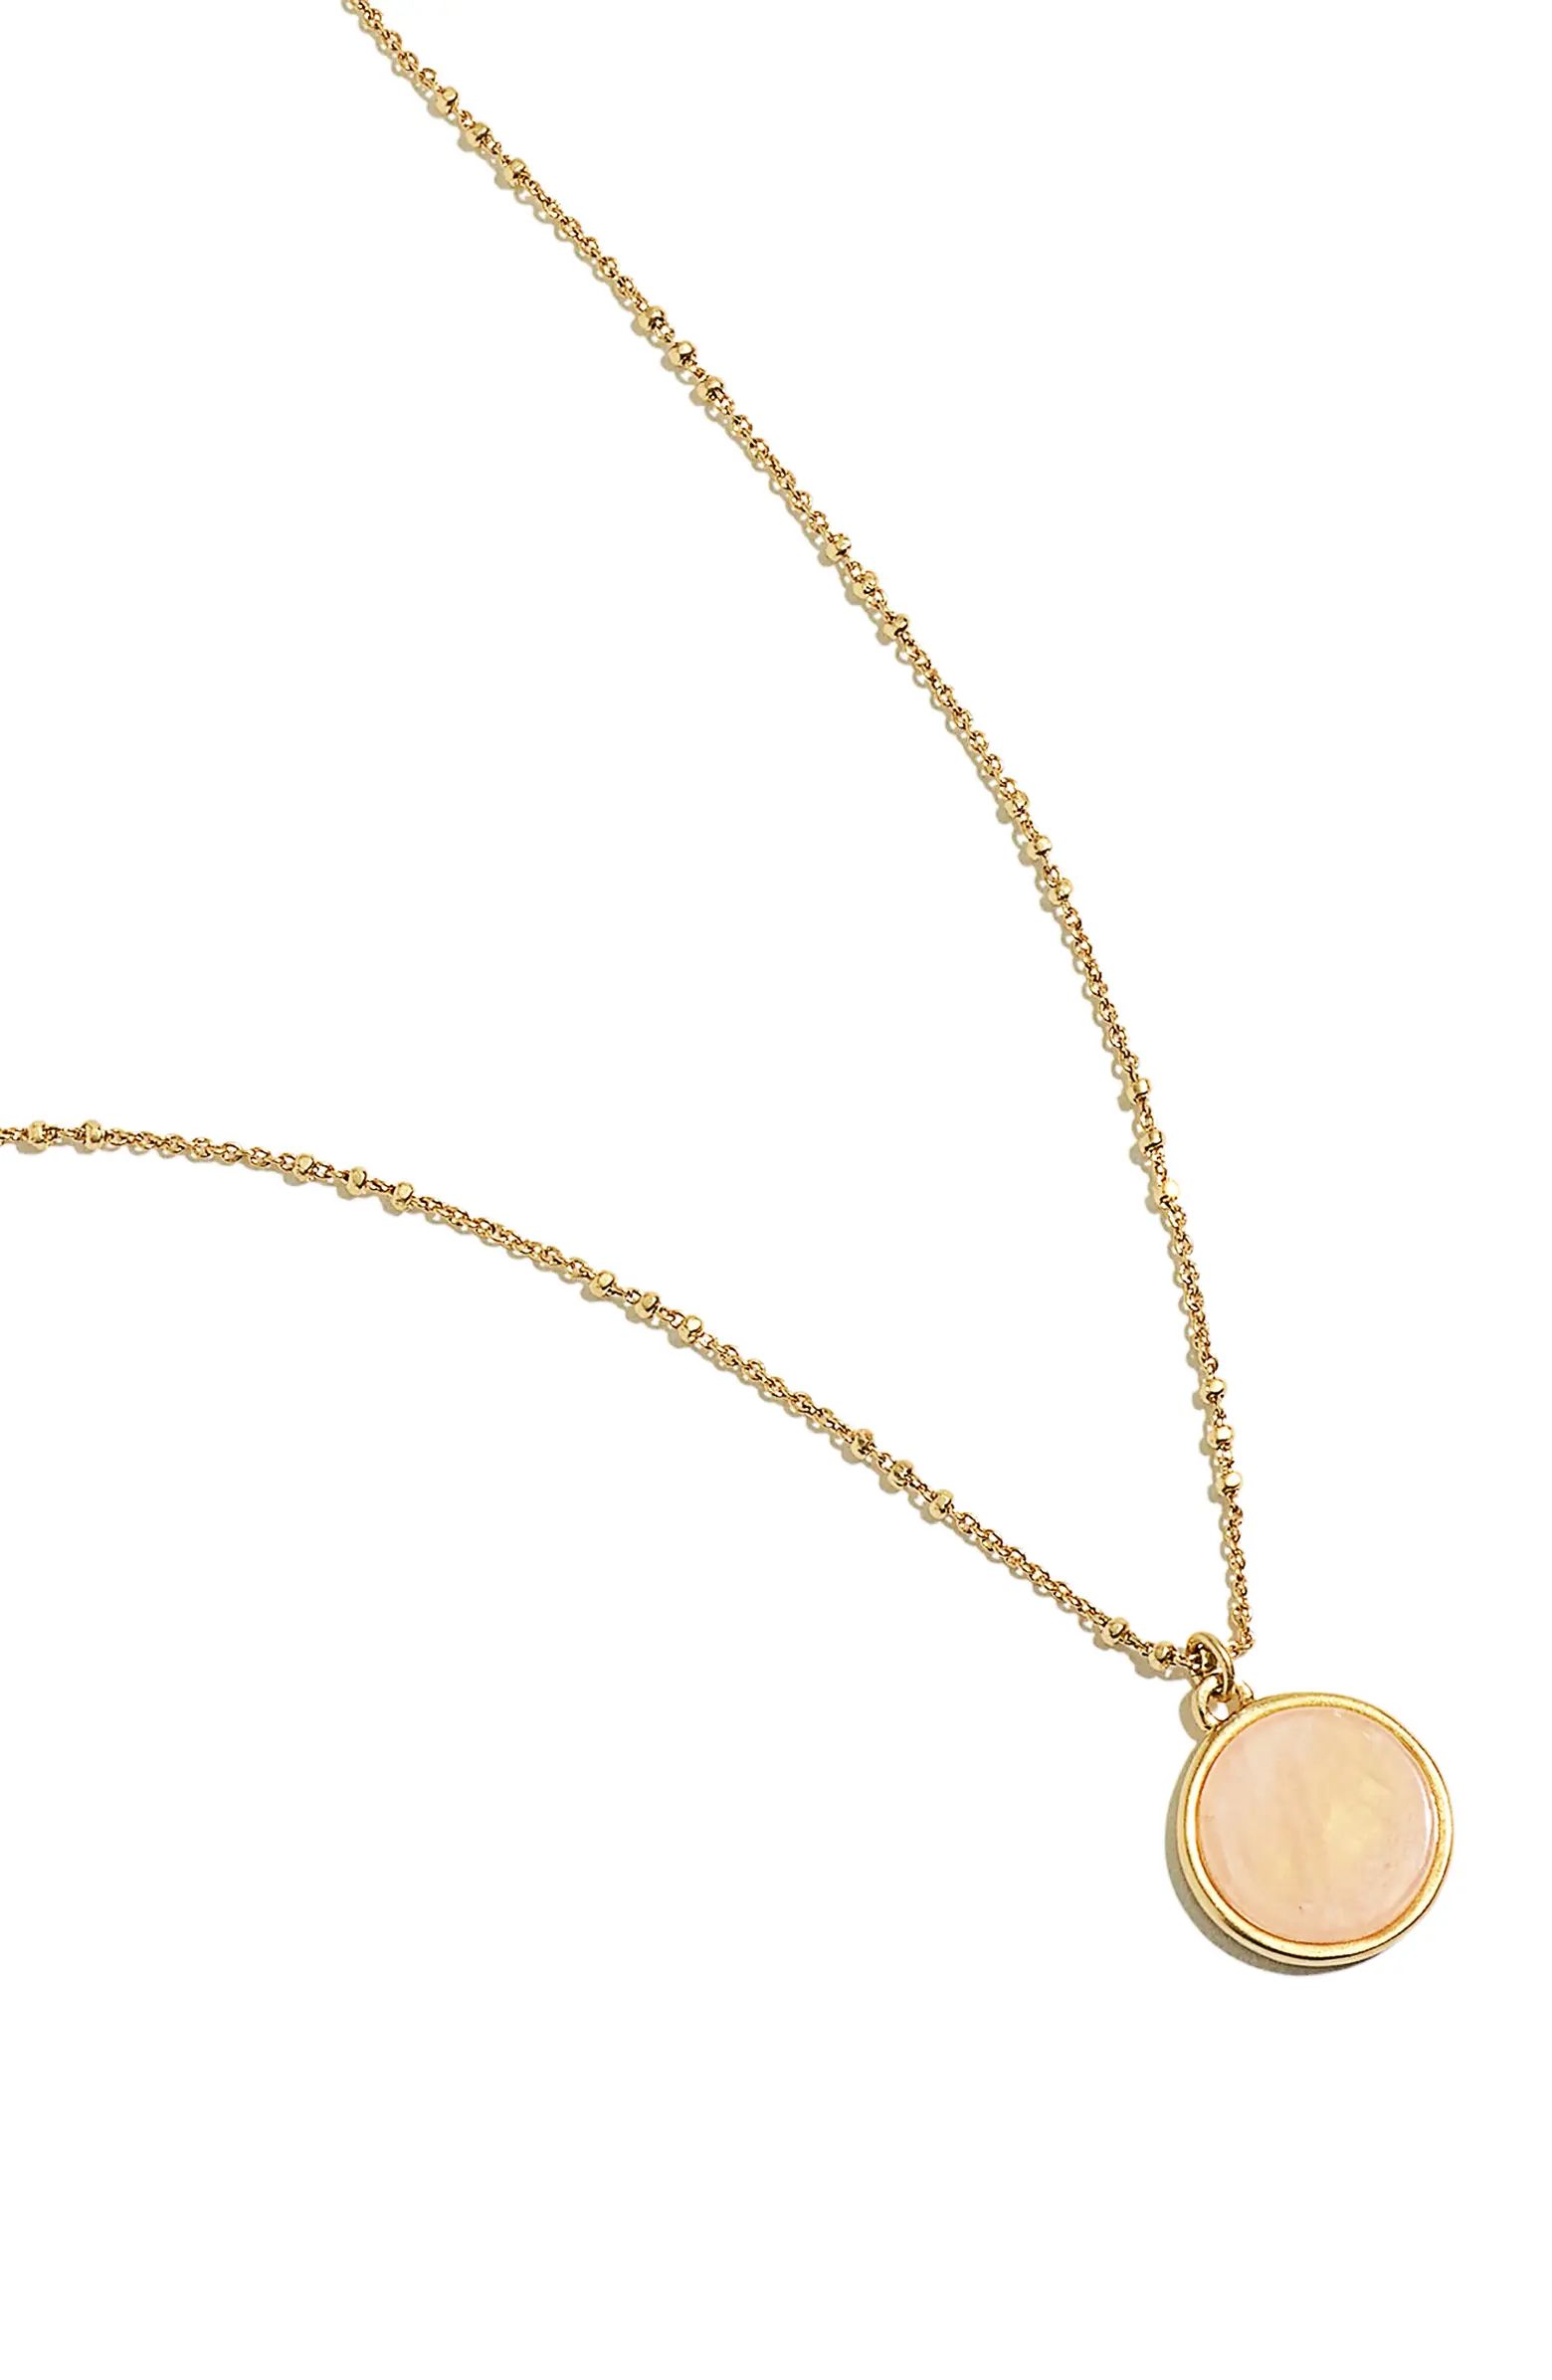 Madewell Alta Cabachon Pendant Necklace | Nordstrom | Nordstrom